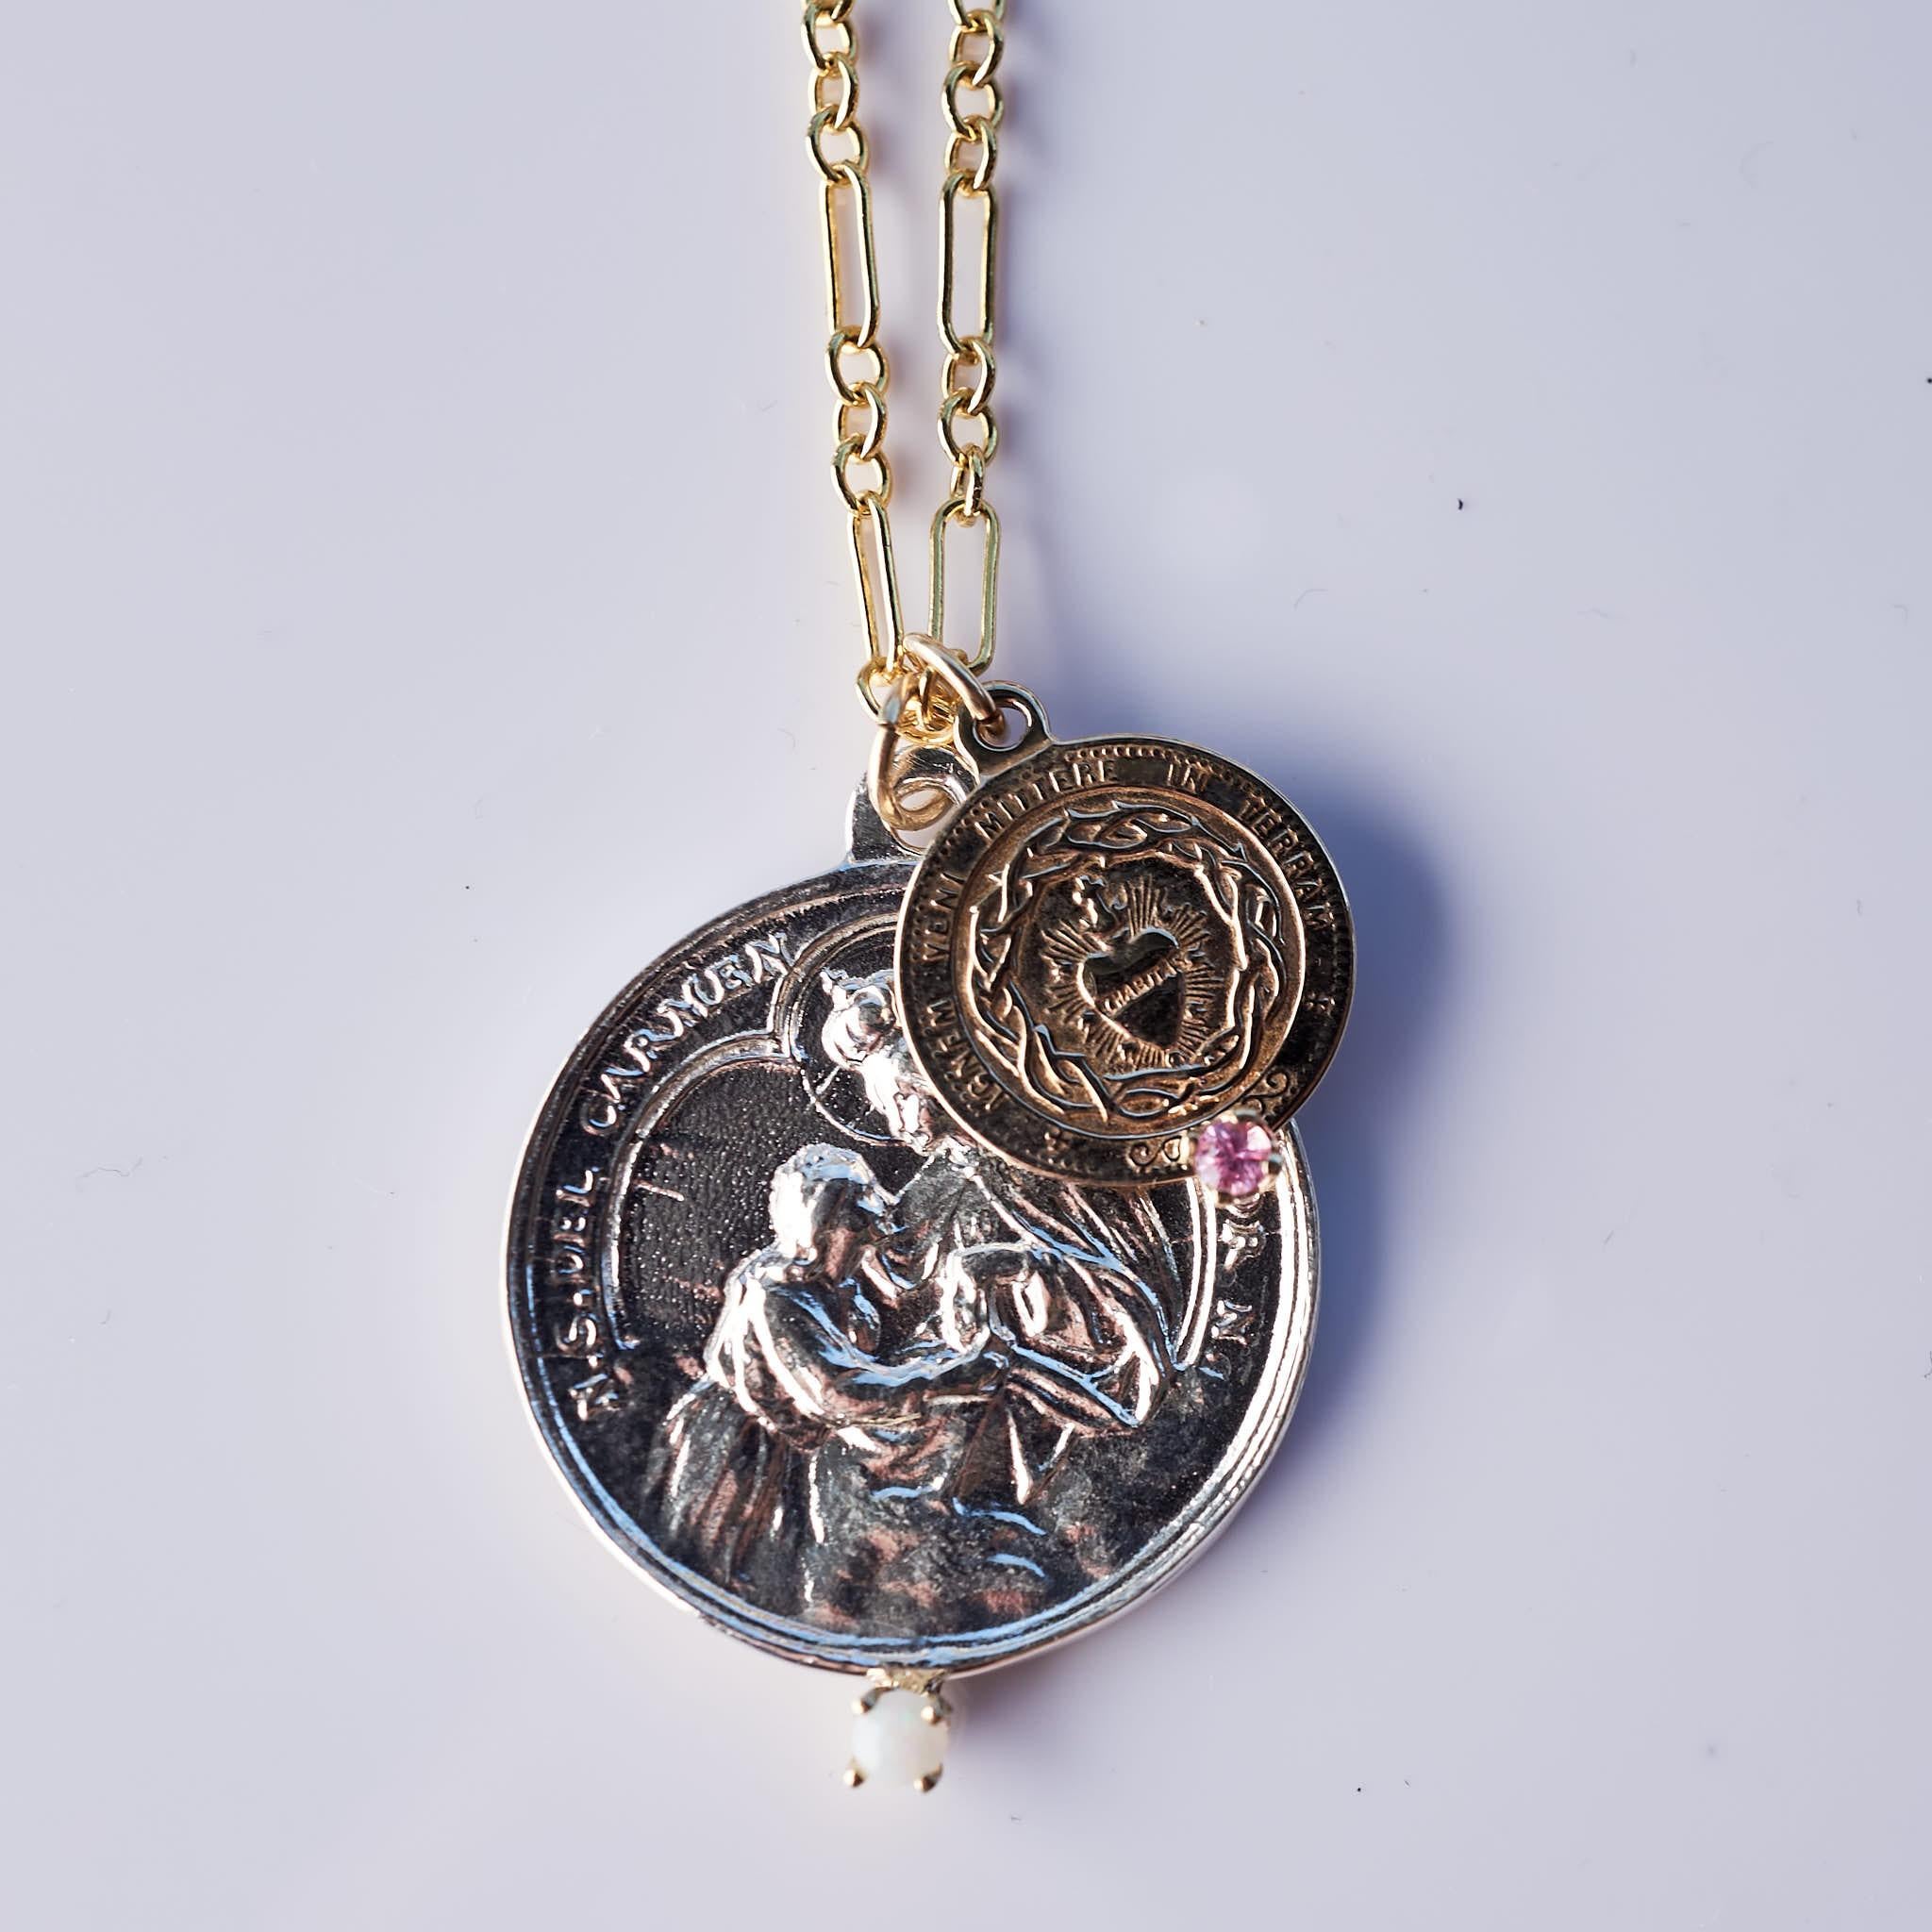 Medal Chain Necklace with two Medals Virgin Mary in Silver and Sacred Heart in Bronze, set with Opal and Pink Sapphire in 14k Gold Prongs, Necklace can be used in different lengths  24